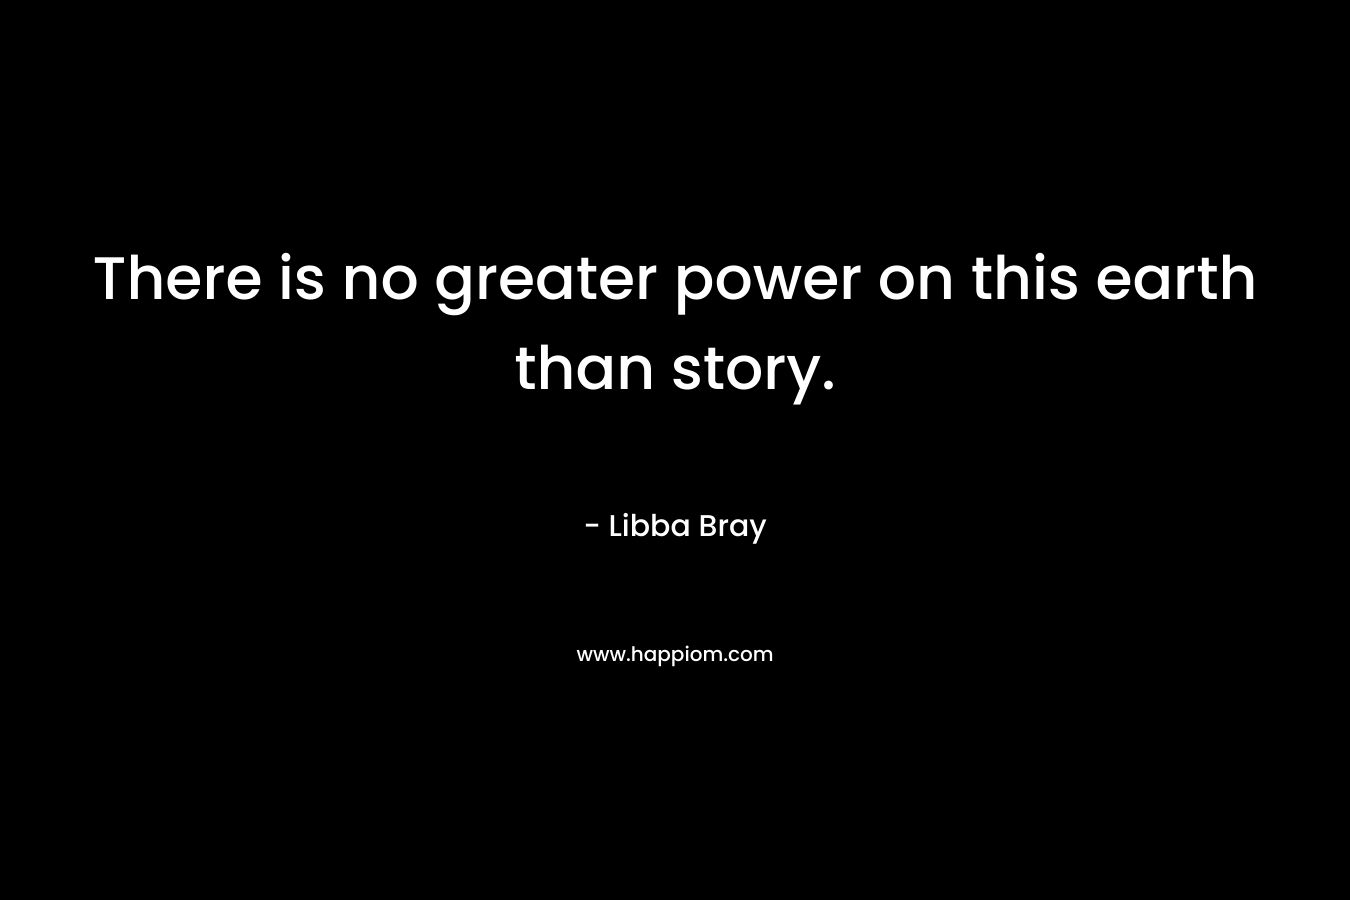 There is no greater power on this earth than story. – Libba Bray